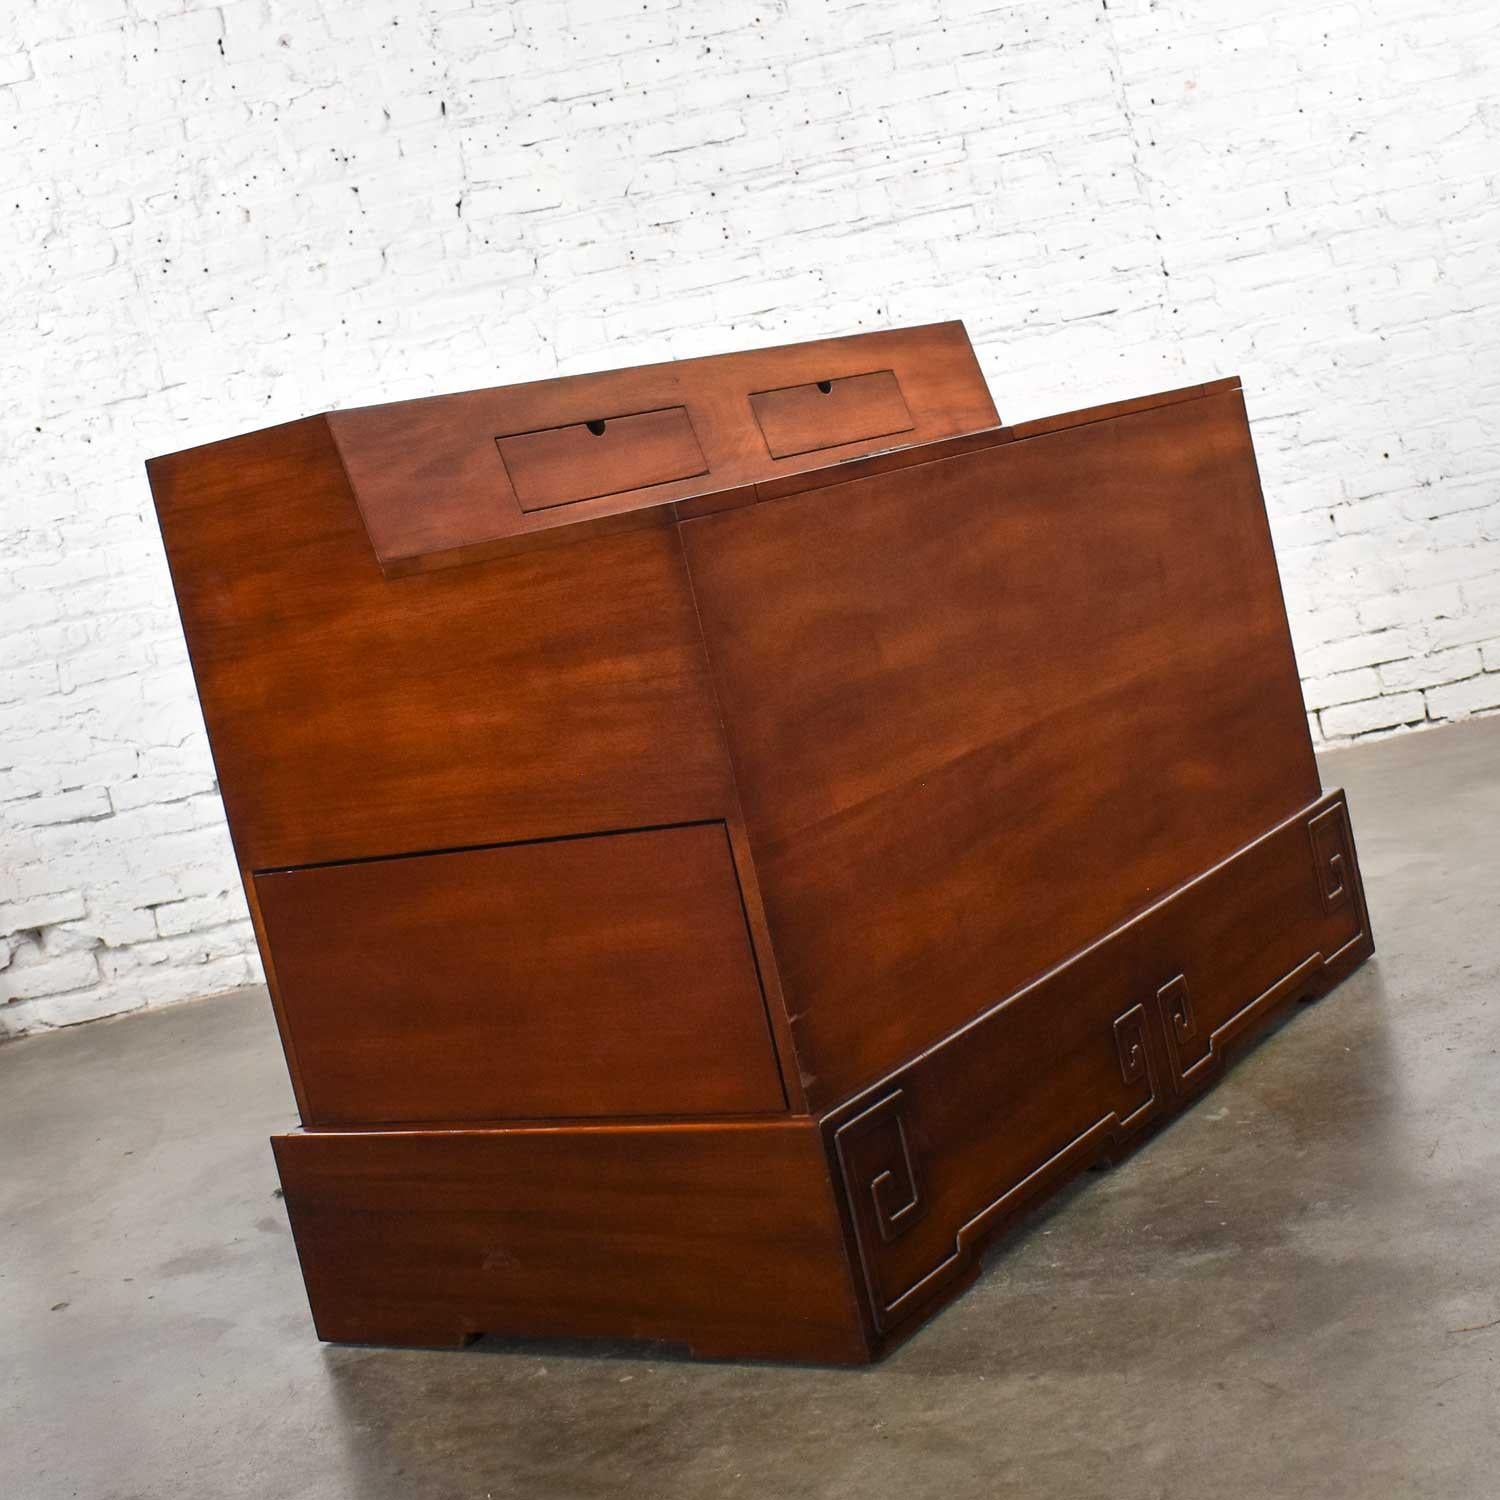 Art Deco Style Mahogany Entry Desk or Bar by IMA S.A. Bogota, Colombia In Good Condition For Sale In Topeka, KS